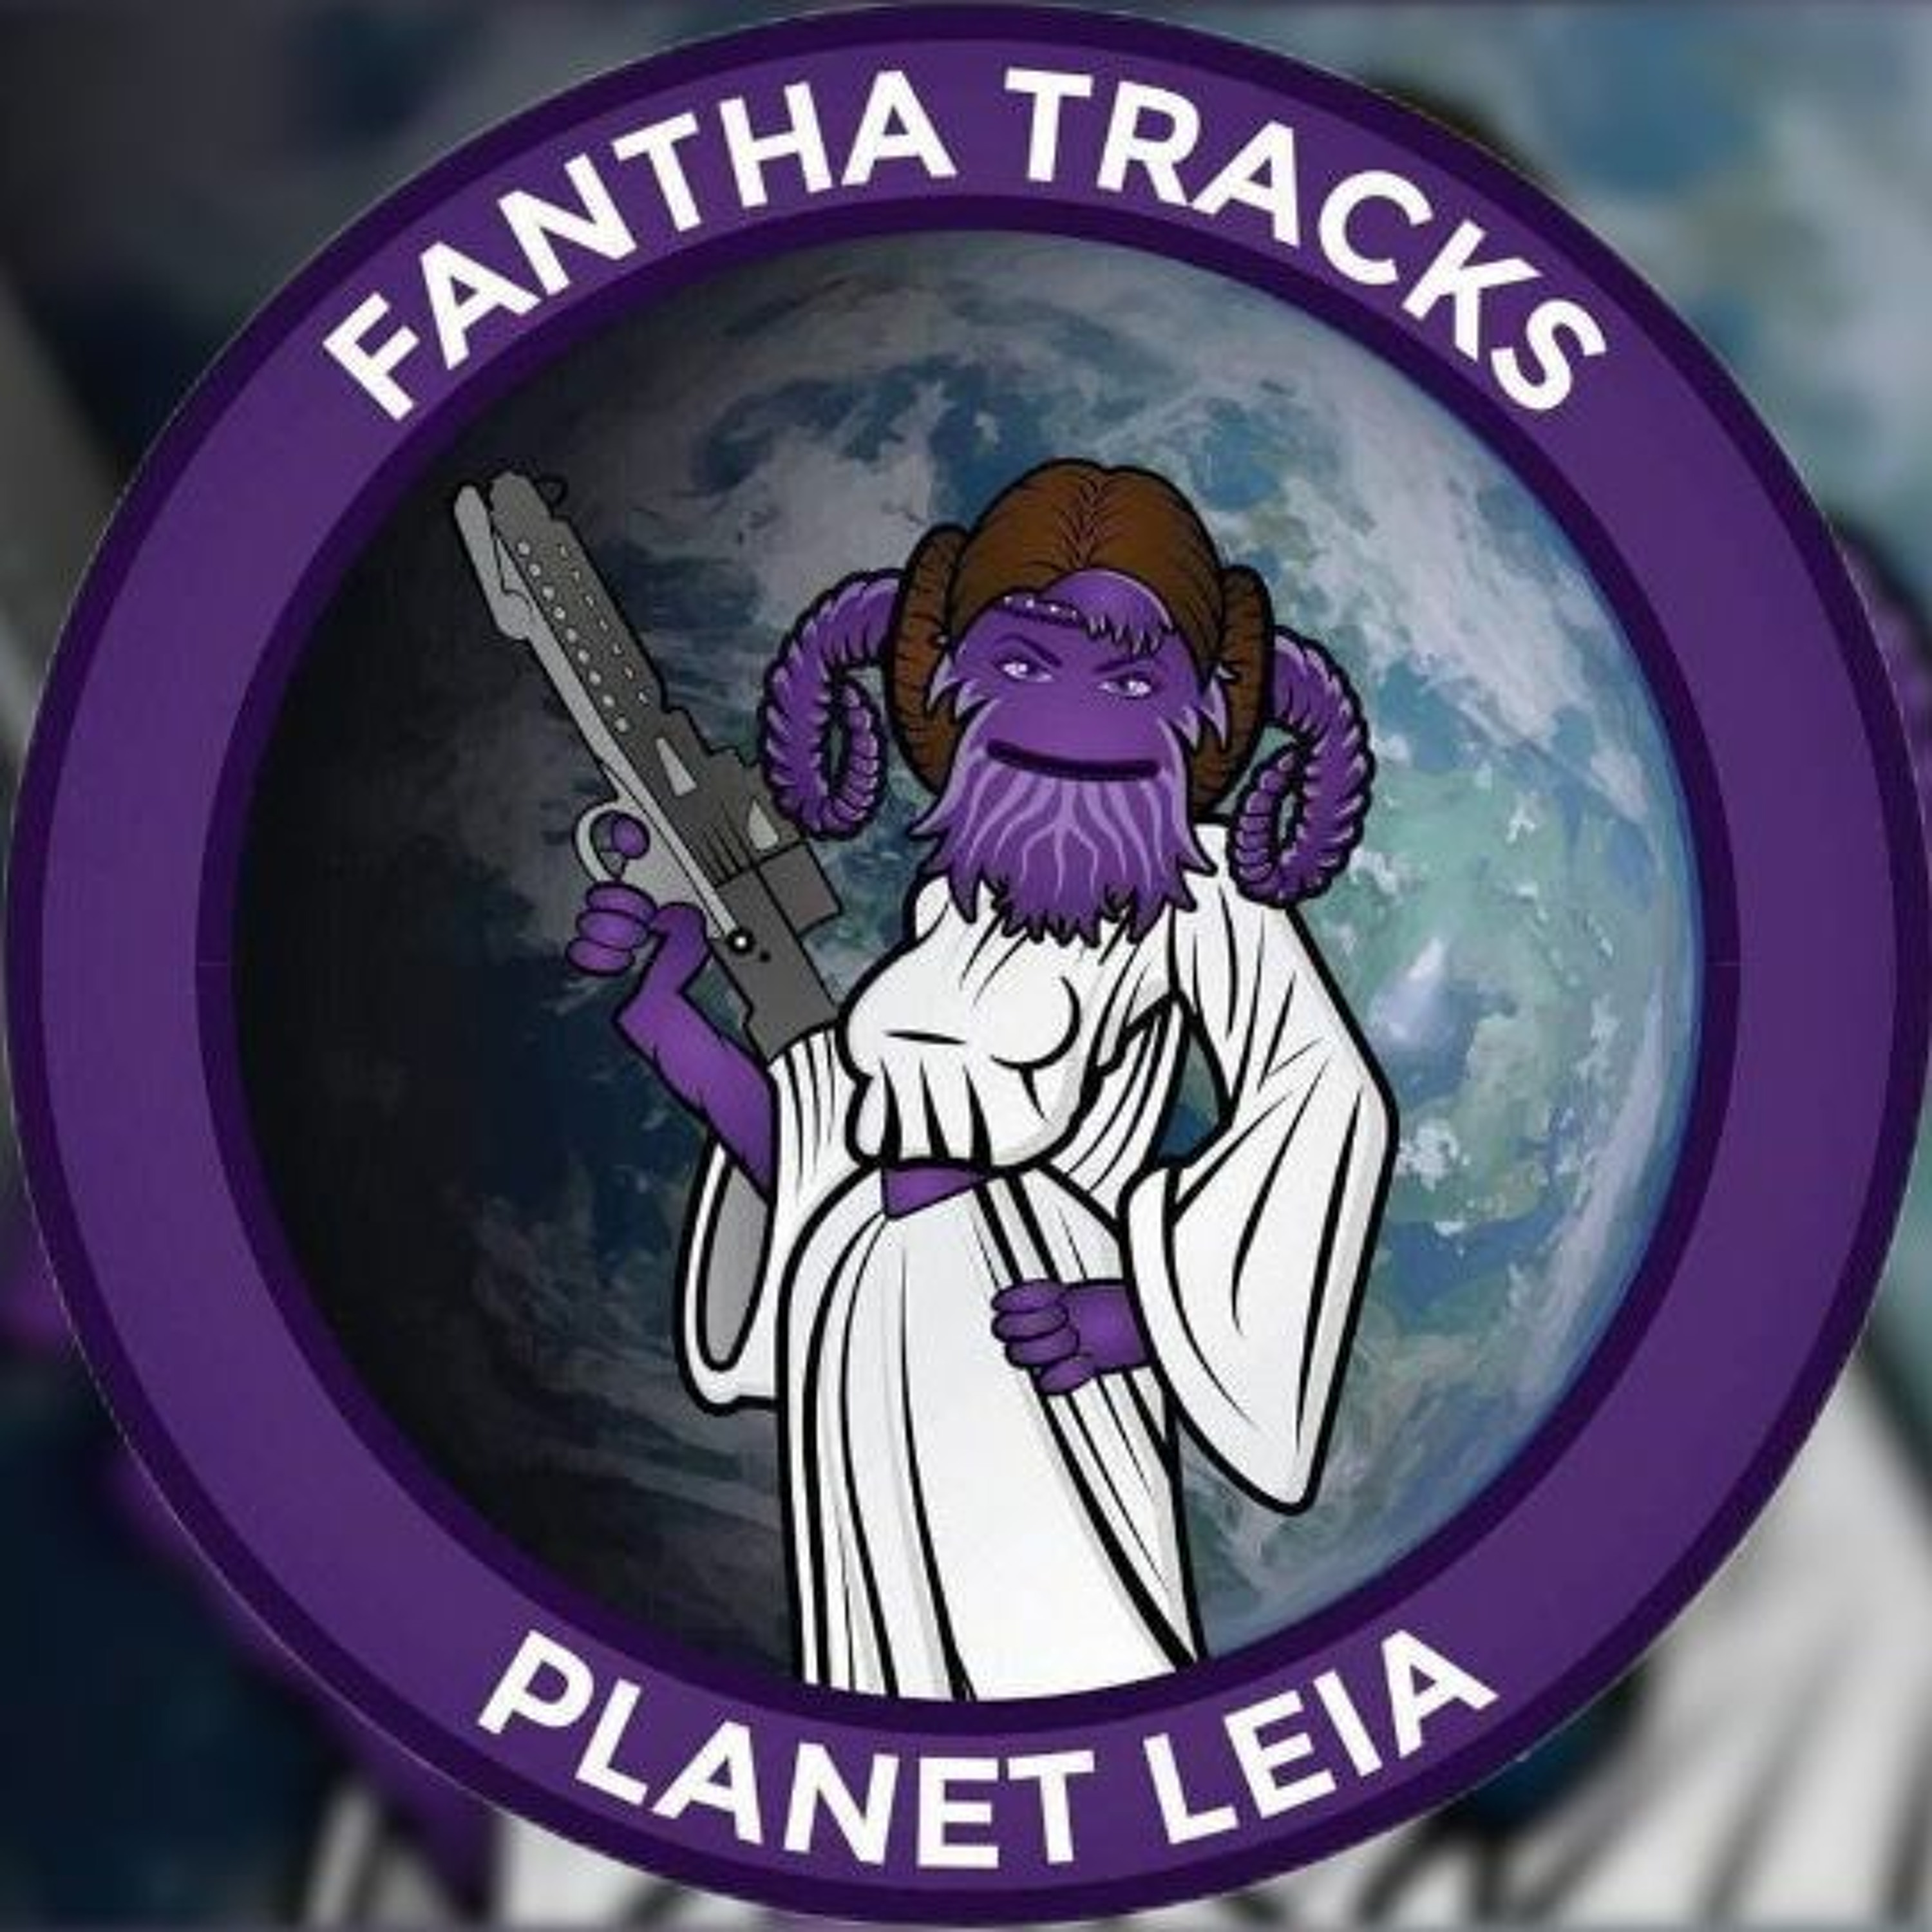 Planet Leia Episode 13: To me, she's royalty